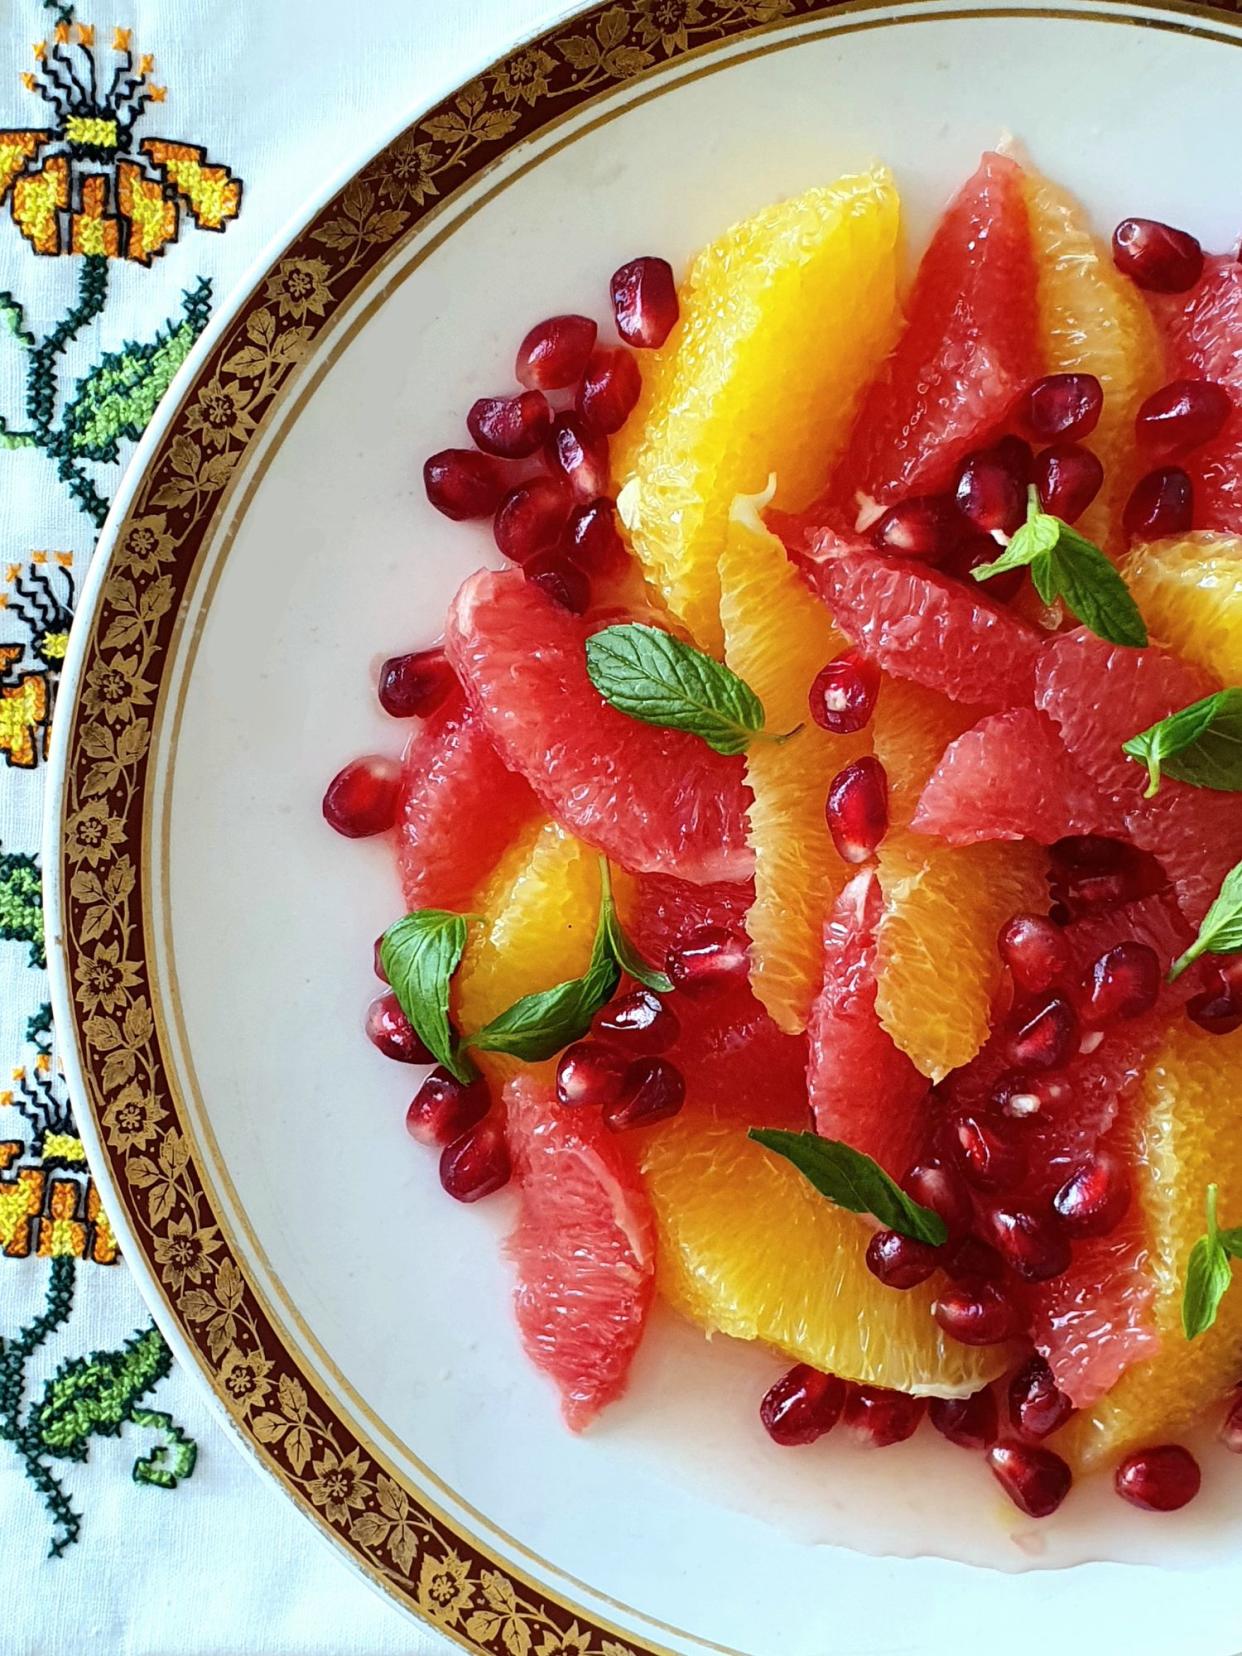 Delicious grapefruit and pomegranate salad